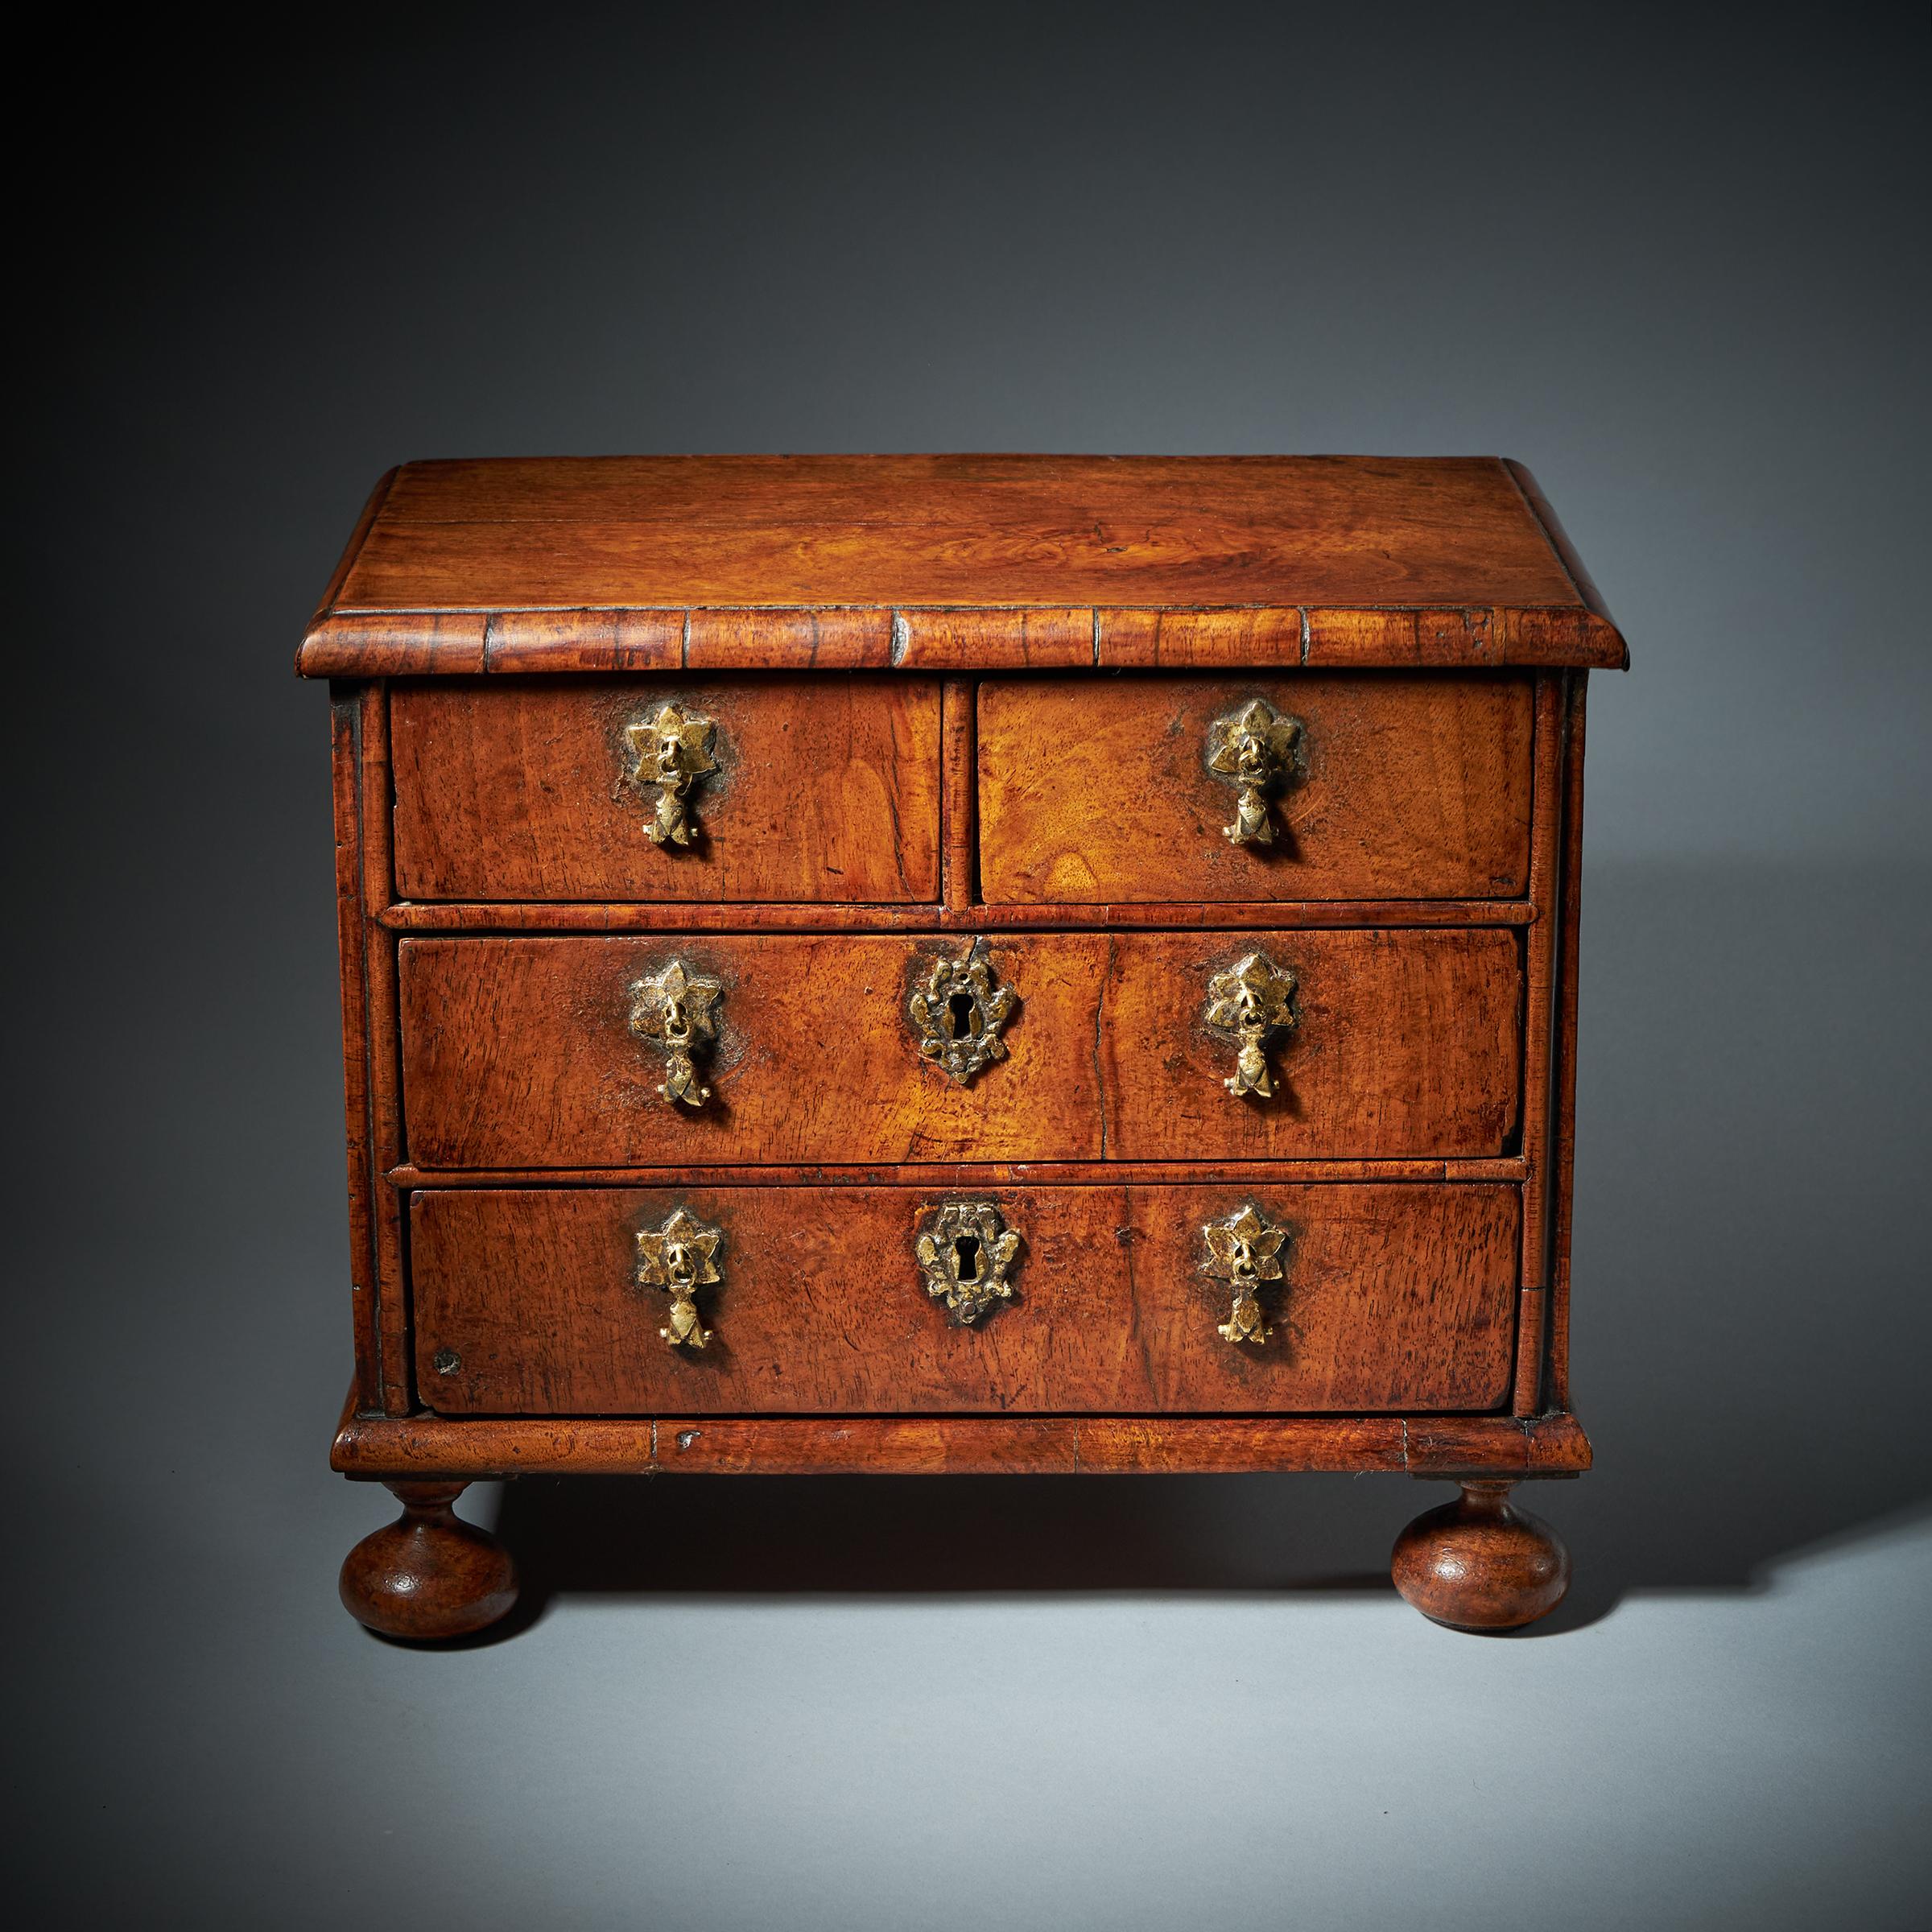 Rare 17th Century Miniature William and Mary Walnut Table Top Chest, circa 1690 In Good Condition For Sale In Oxfordshire, United Kingdom